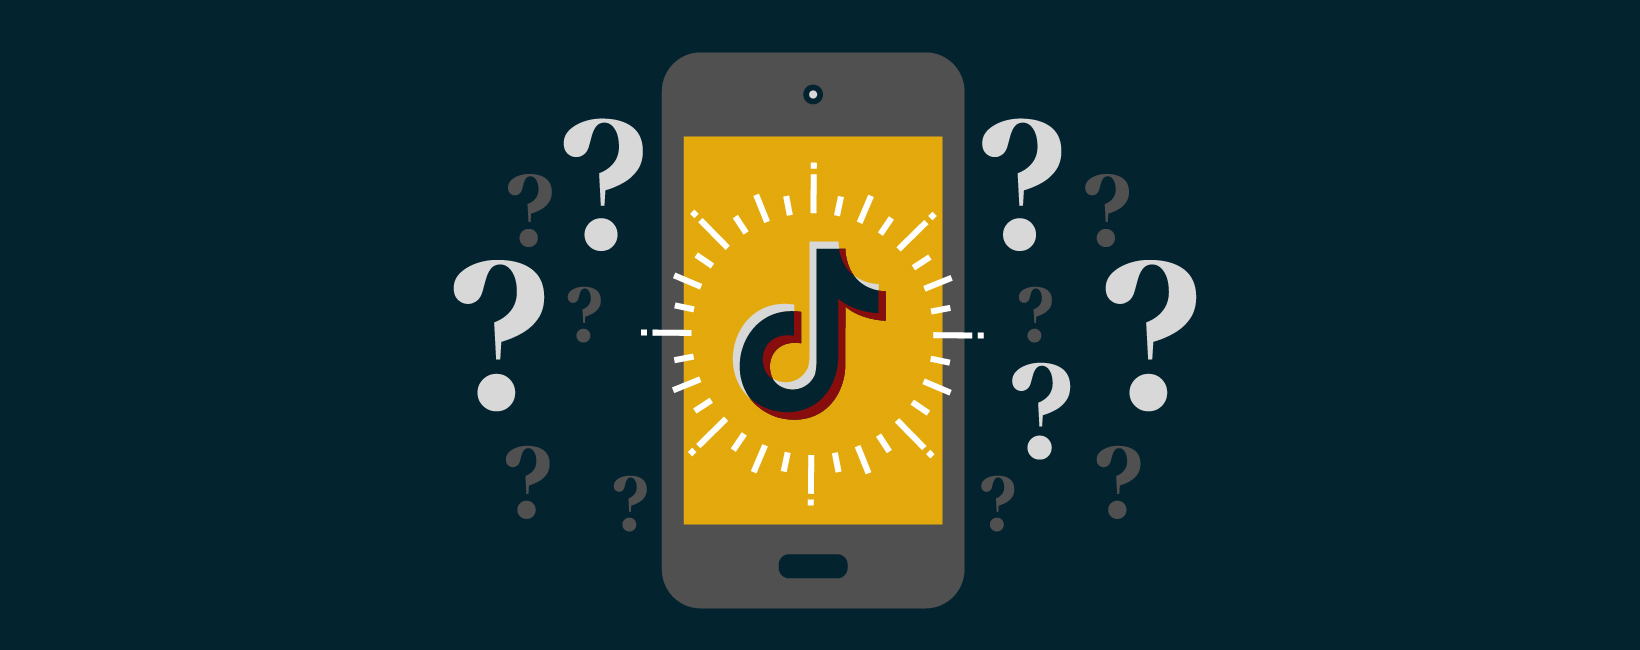 Cartoon image of phone with TikTok symbol surrounded by question marks